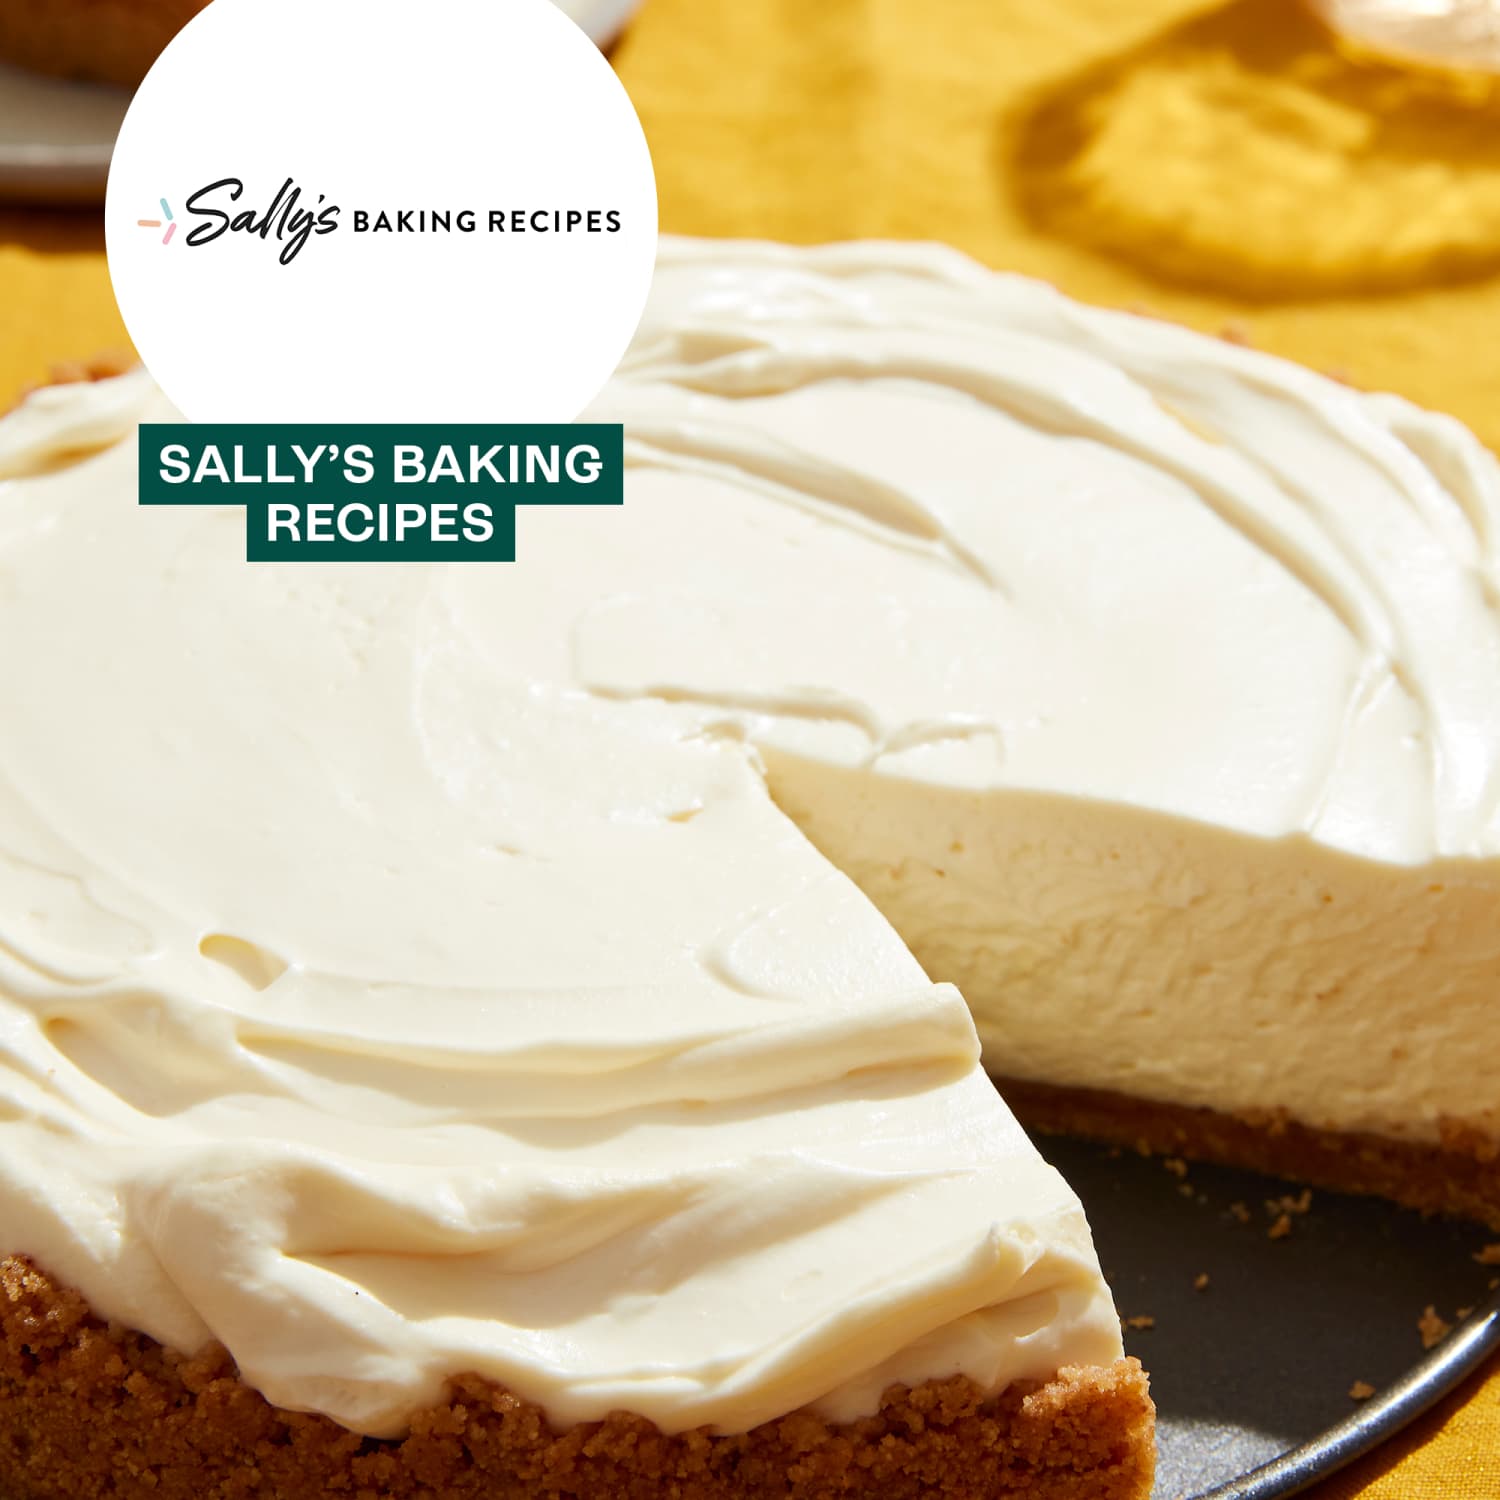 Best Cheesecake Recipe (With Video) - Sally's Baking Addiction